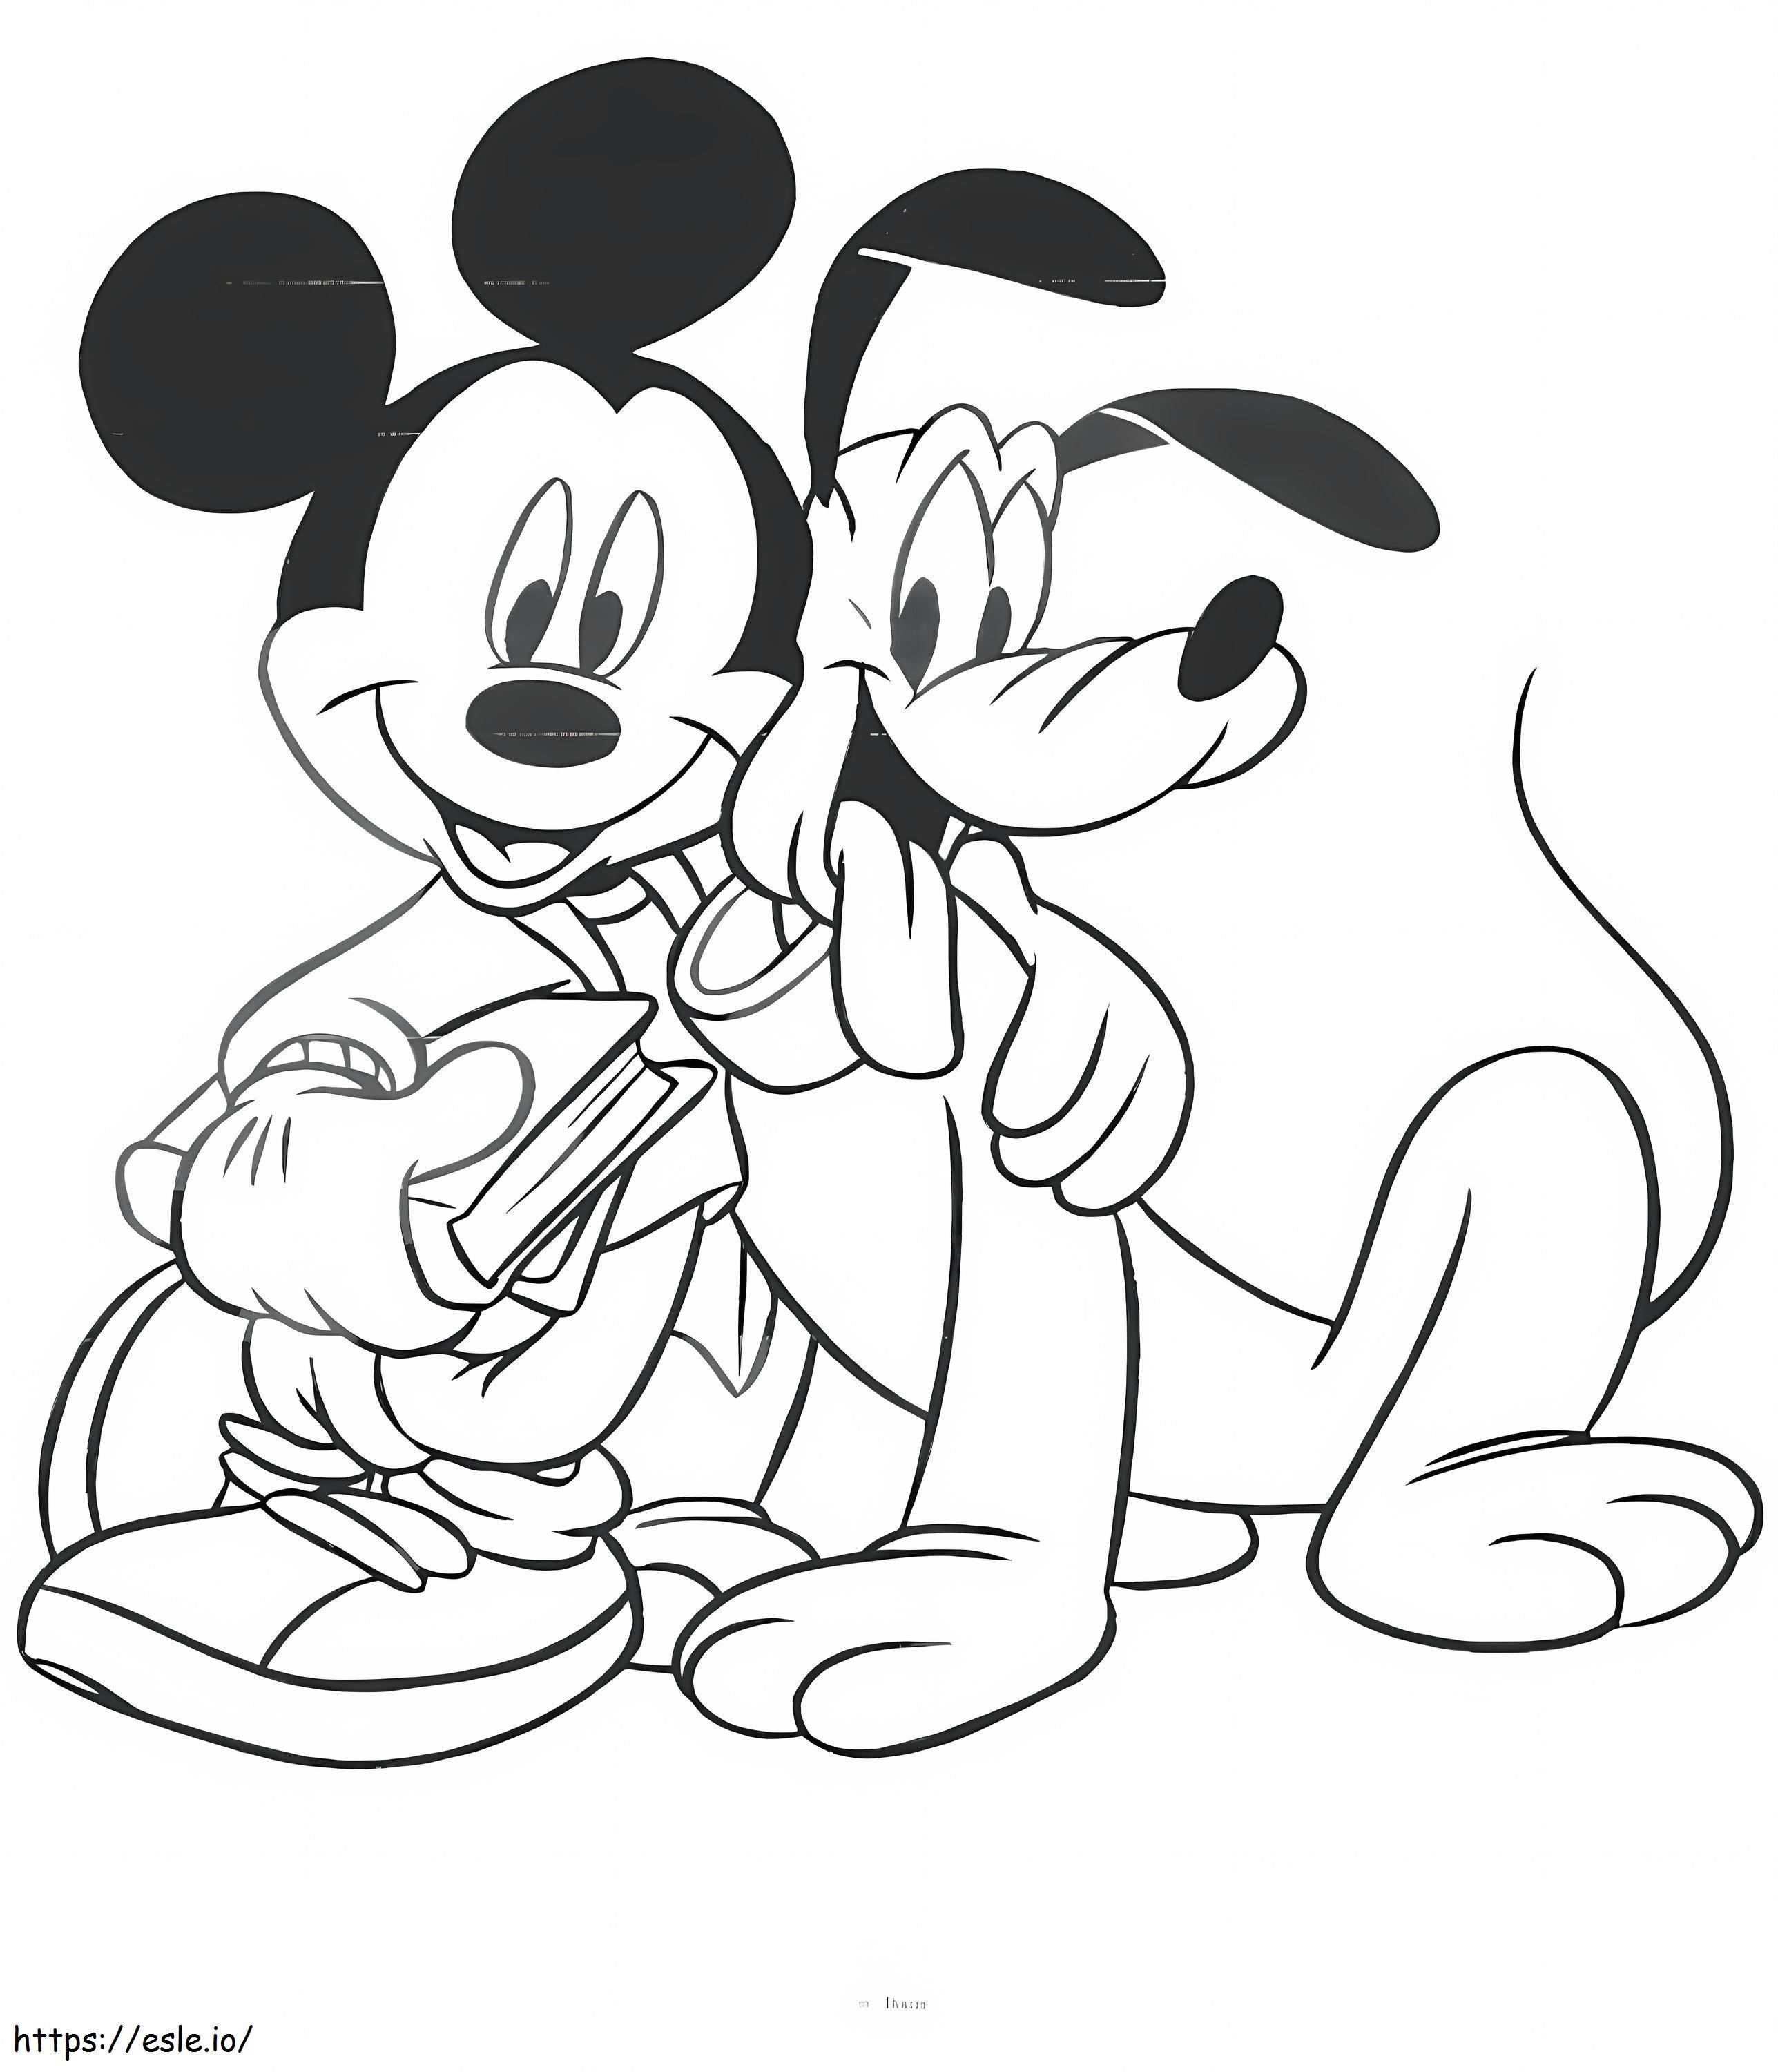 Mickey Mouse Hugging Pluto coloring page